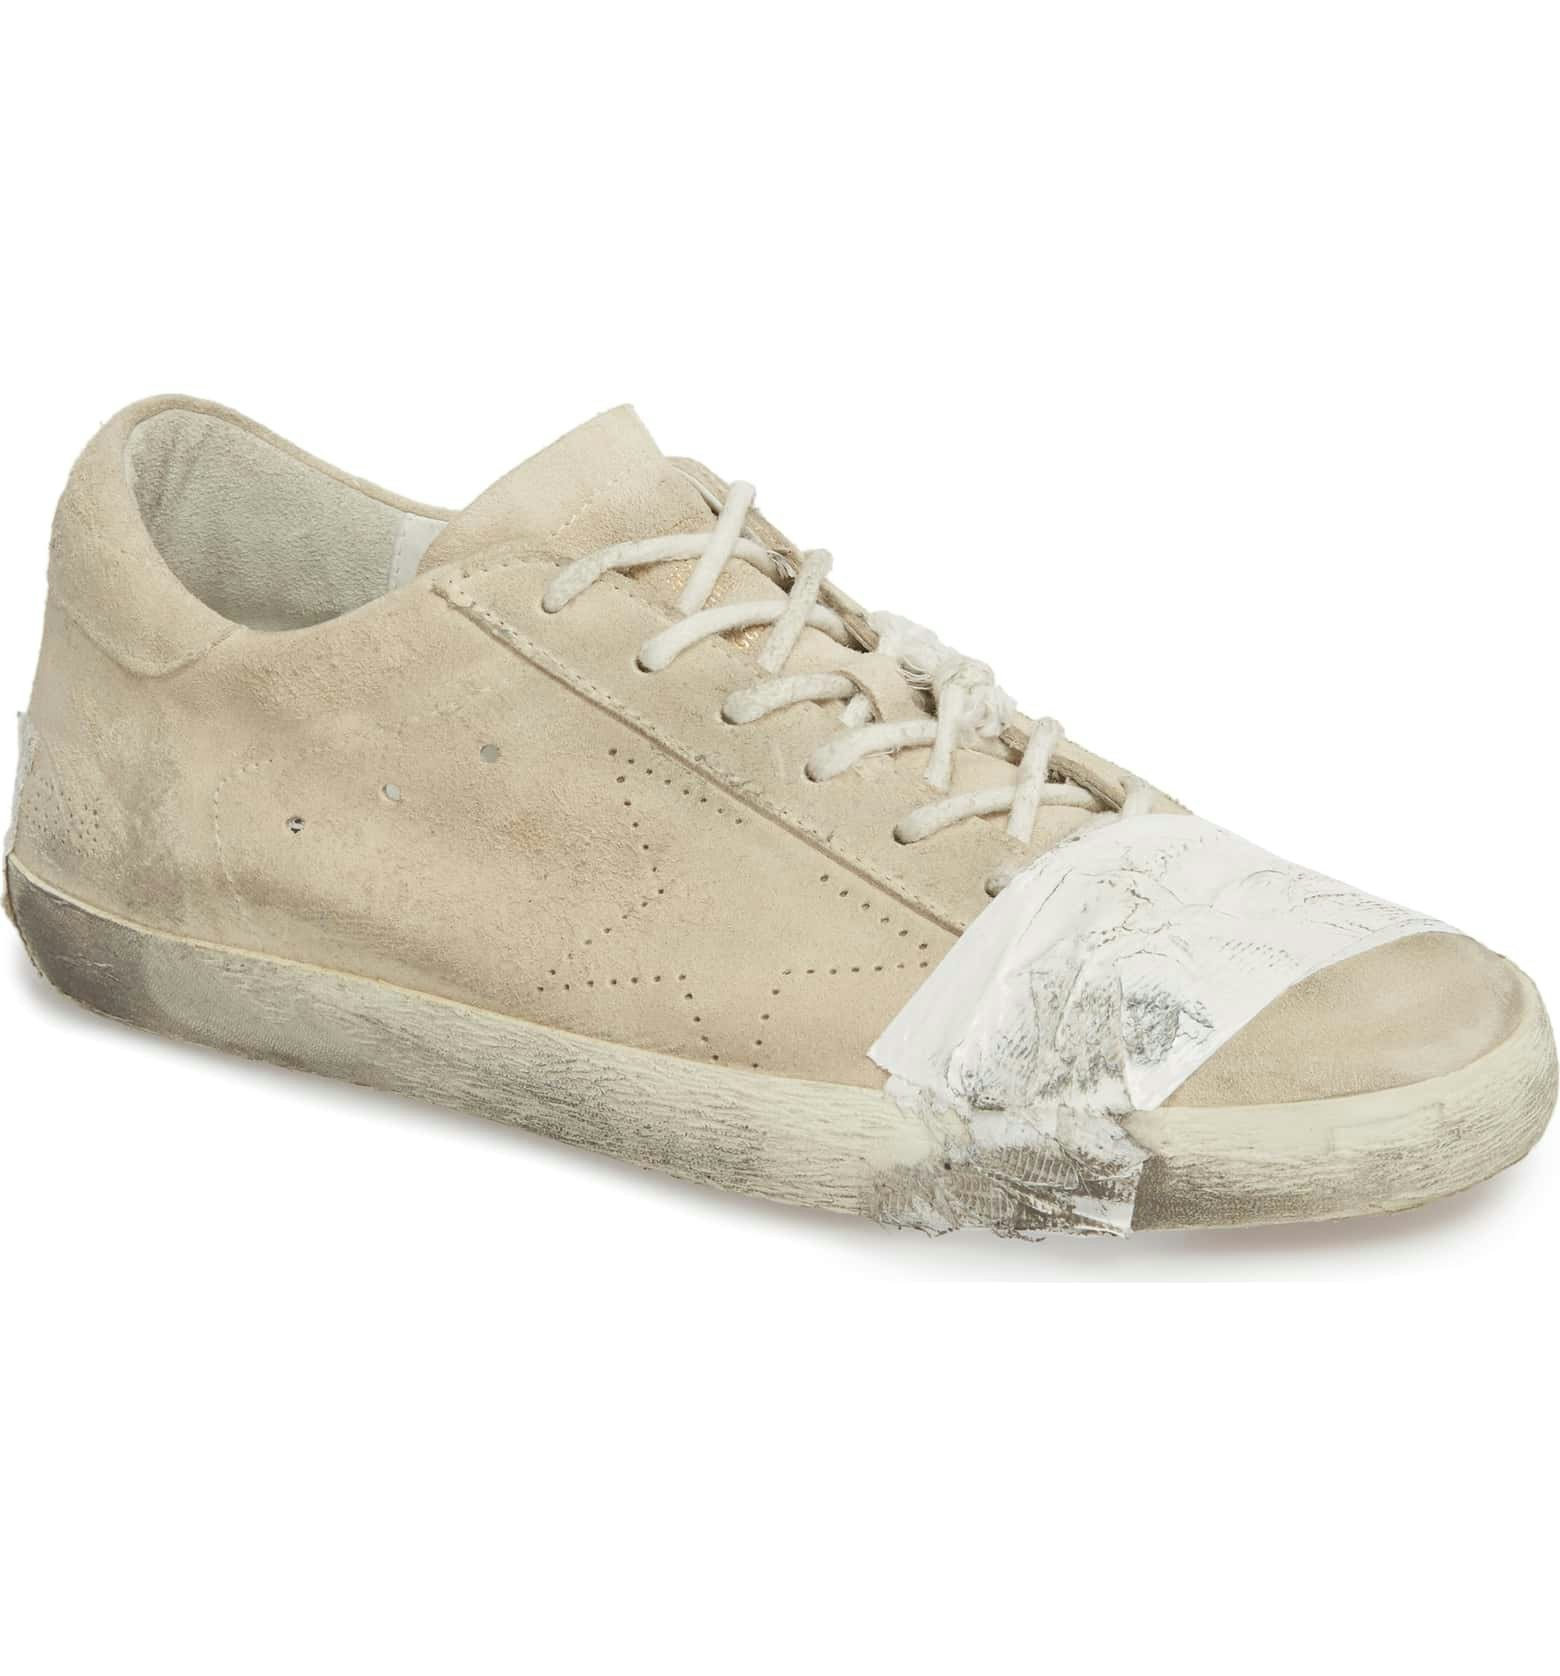 Golden Goose's Beat Up, Taped Sneakers 